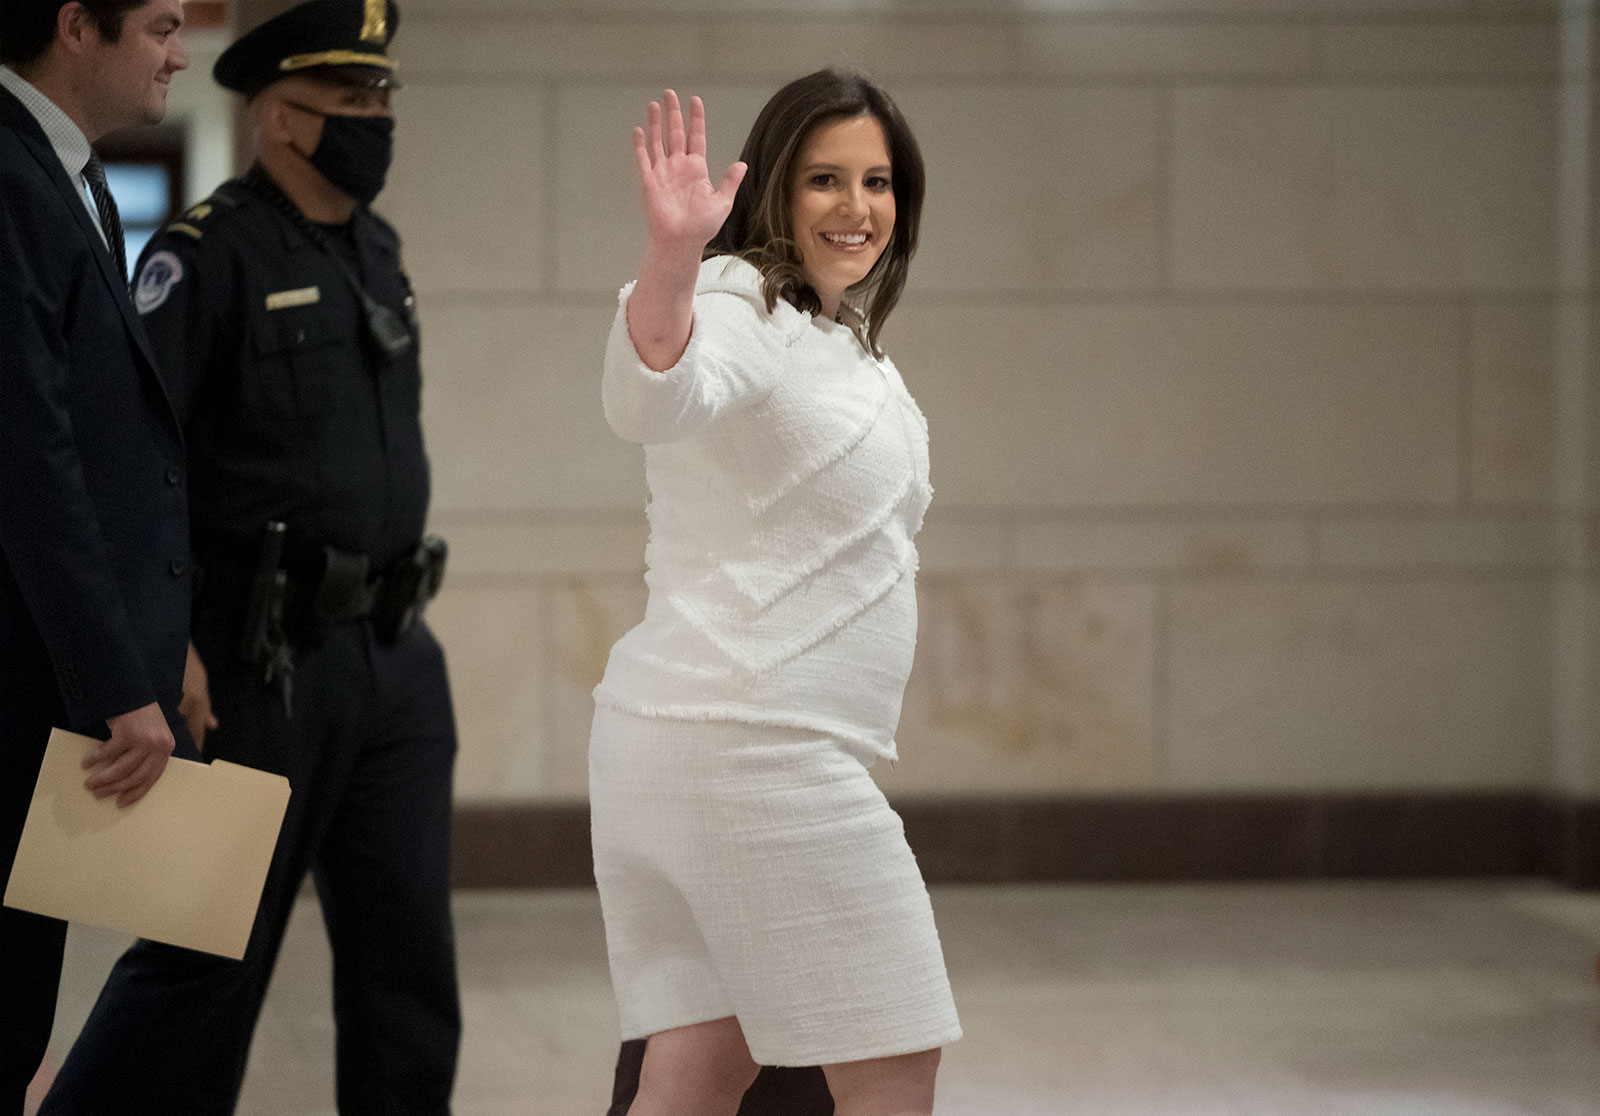 Rep. Elise Stefanik arrives on Capitol Hill on Friday, May 14.